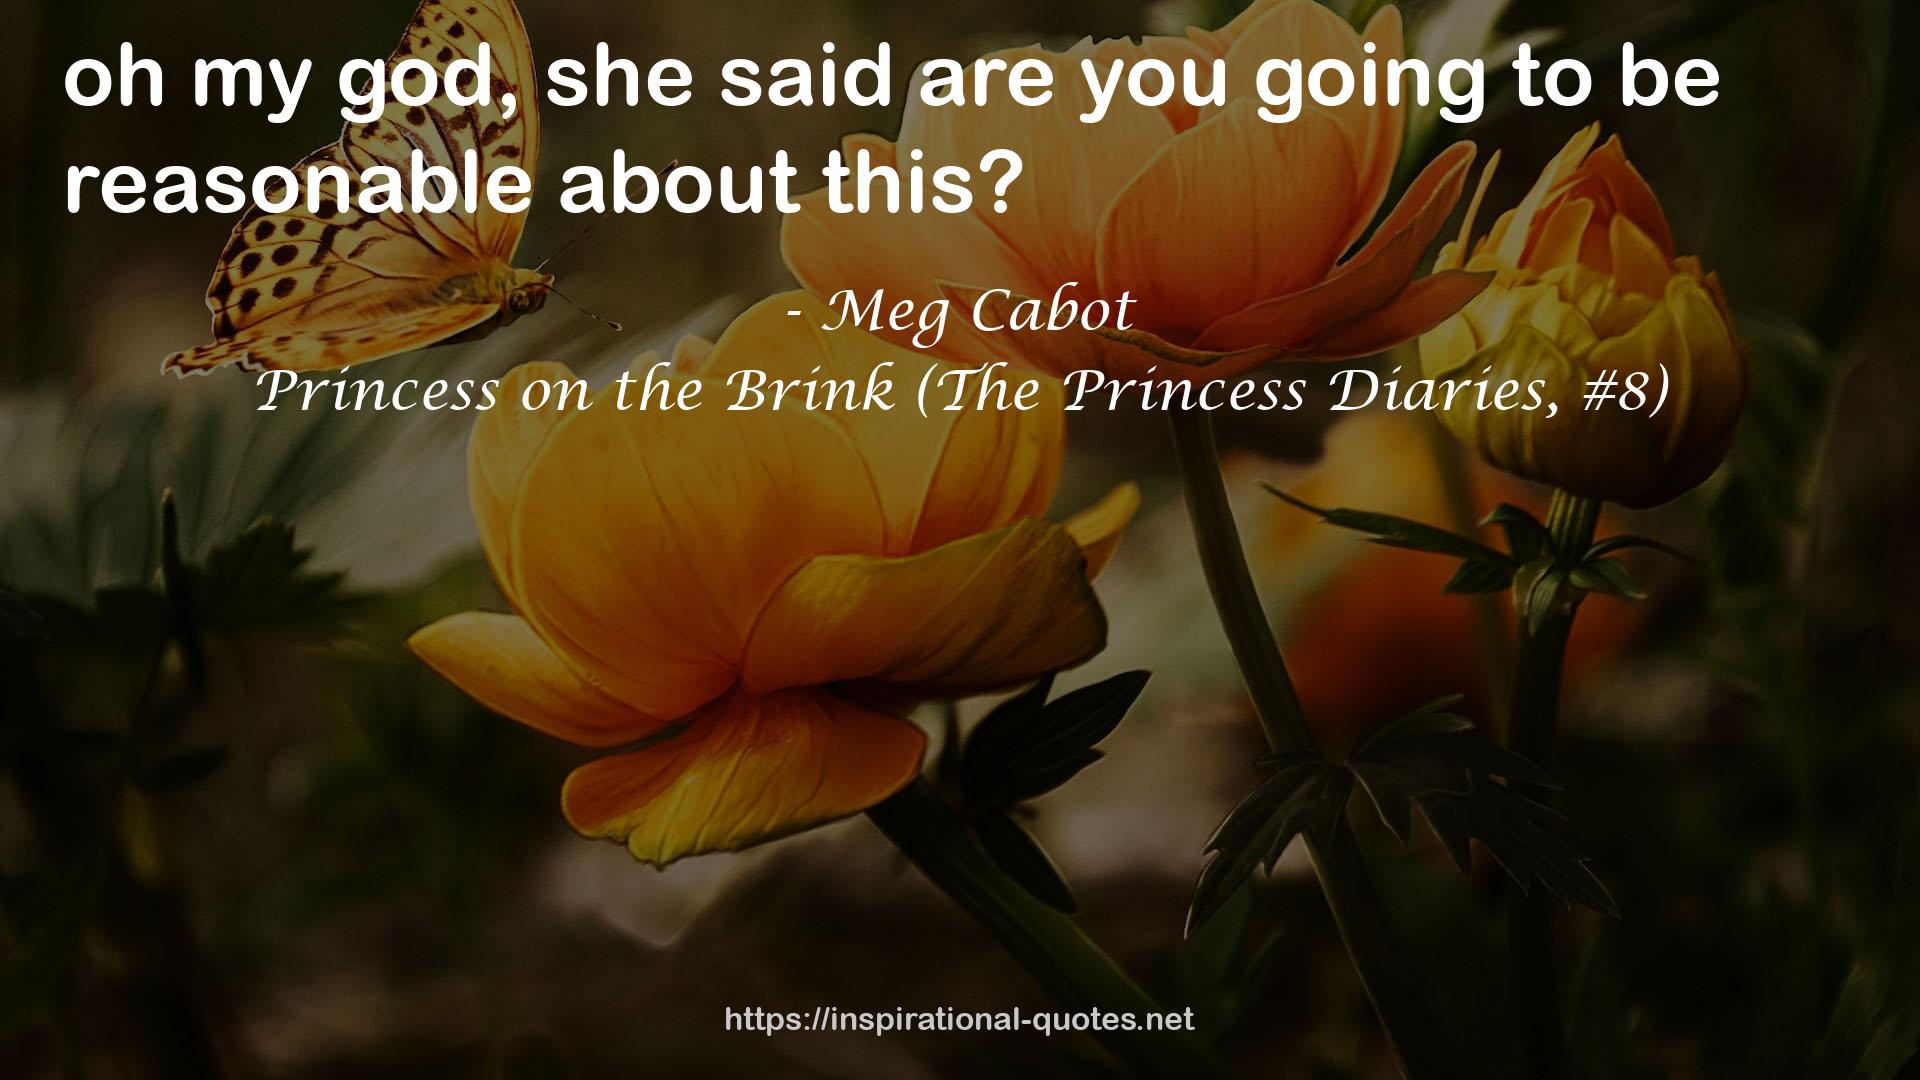 Princess on the Brink (The Princess Diaries, #8) QUOTES